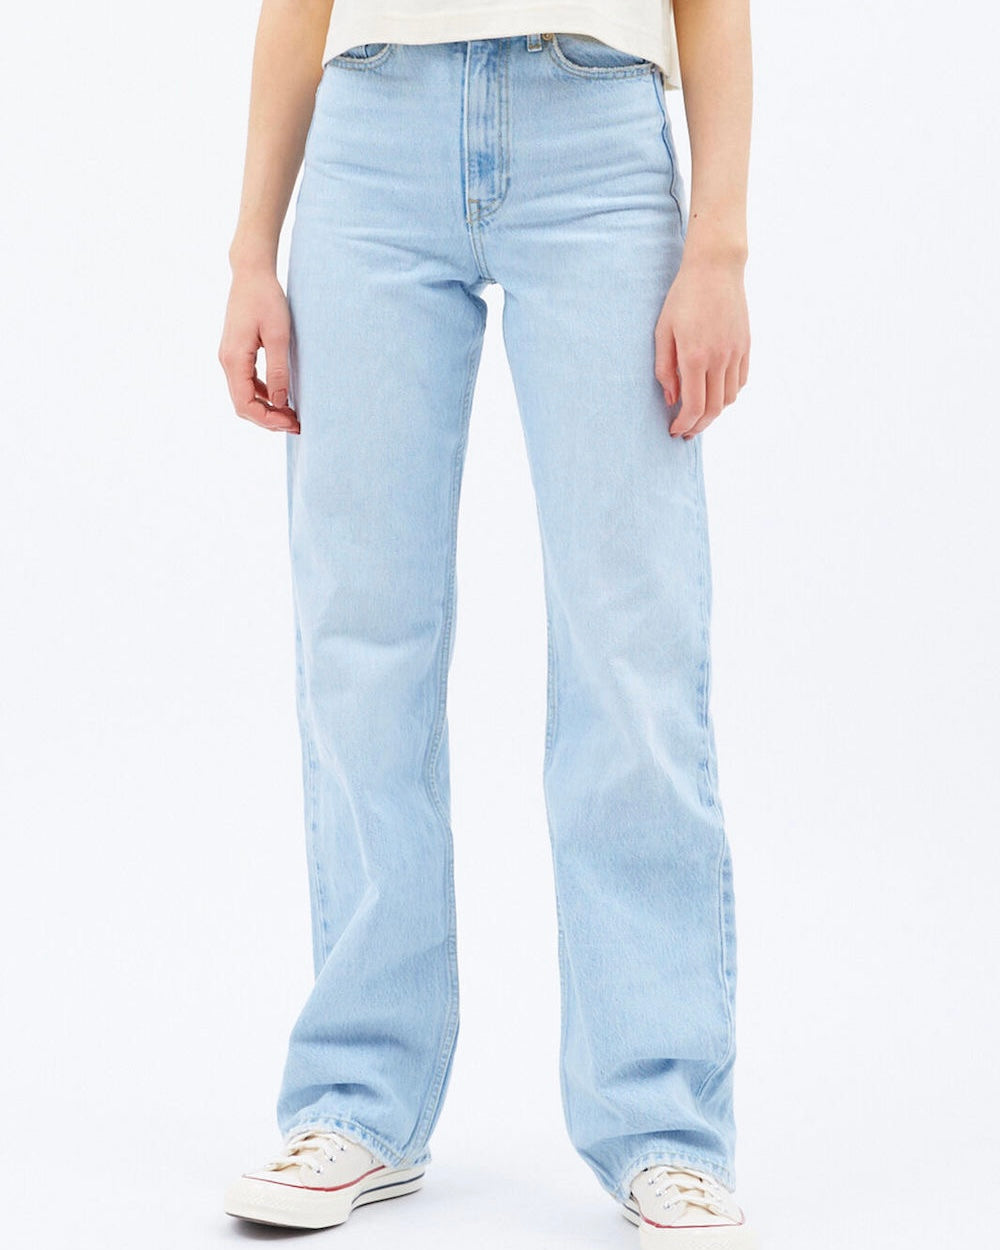 a close up of the Dr. Denim Women's Echo Jean in Superlight Blue Jay worn by a model standing facing the camera